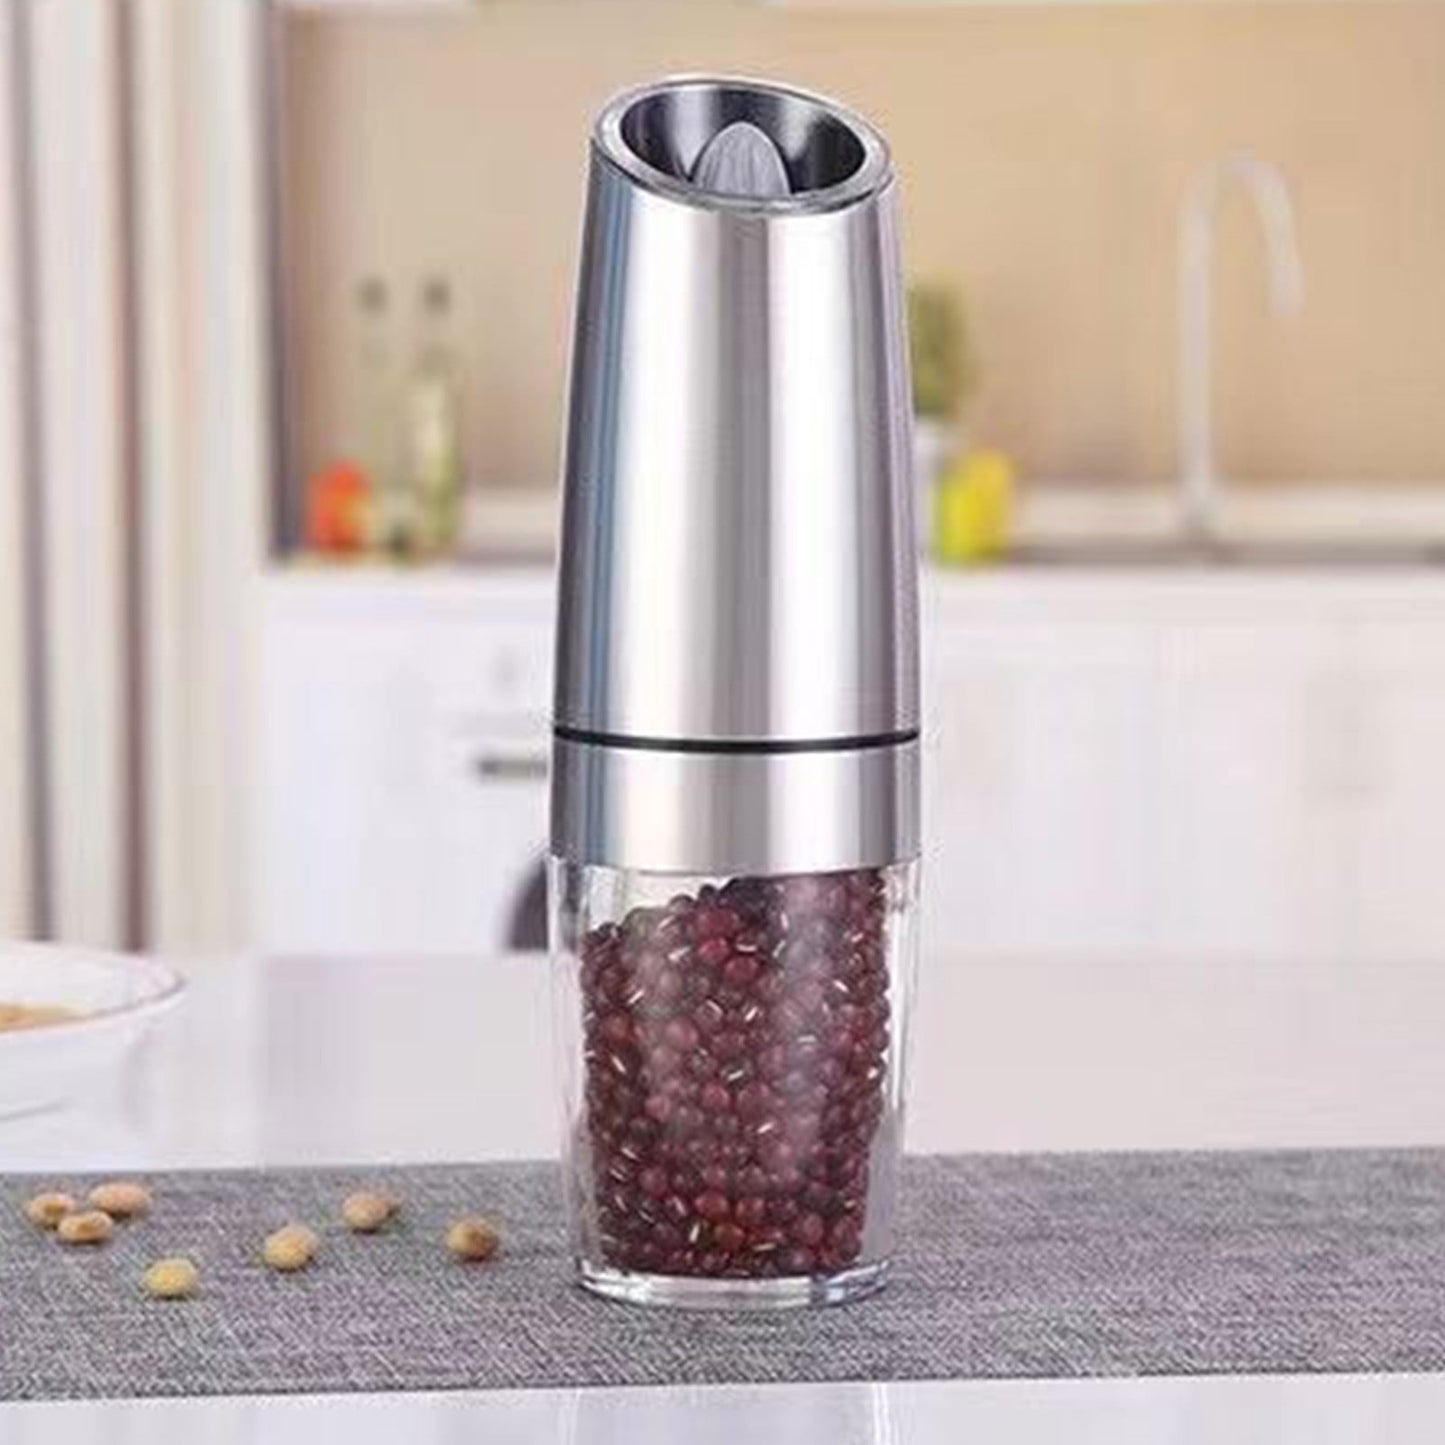 VALSEEL Household Appliances Clearance Gravity Induction Electric Household Stainless Steel ABS Ceramic Core Grinder